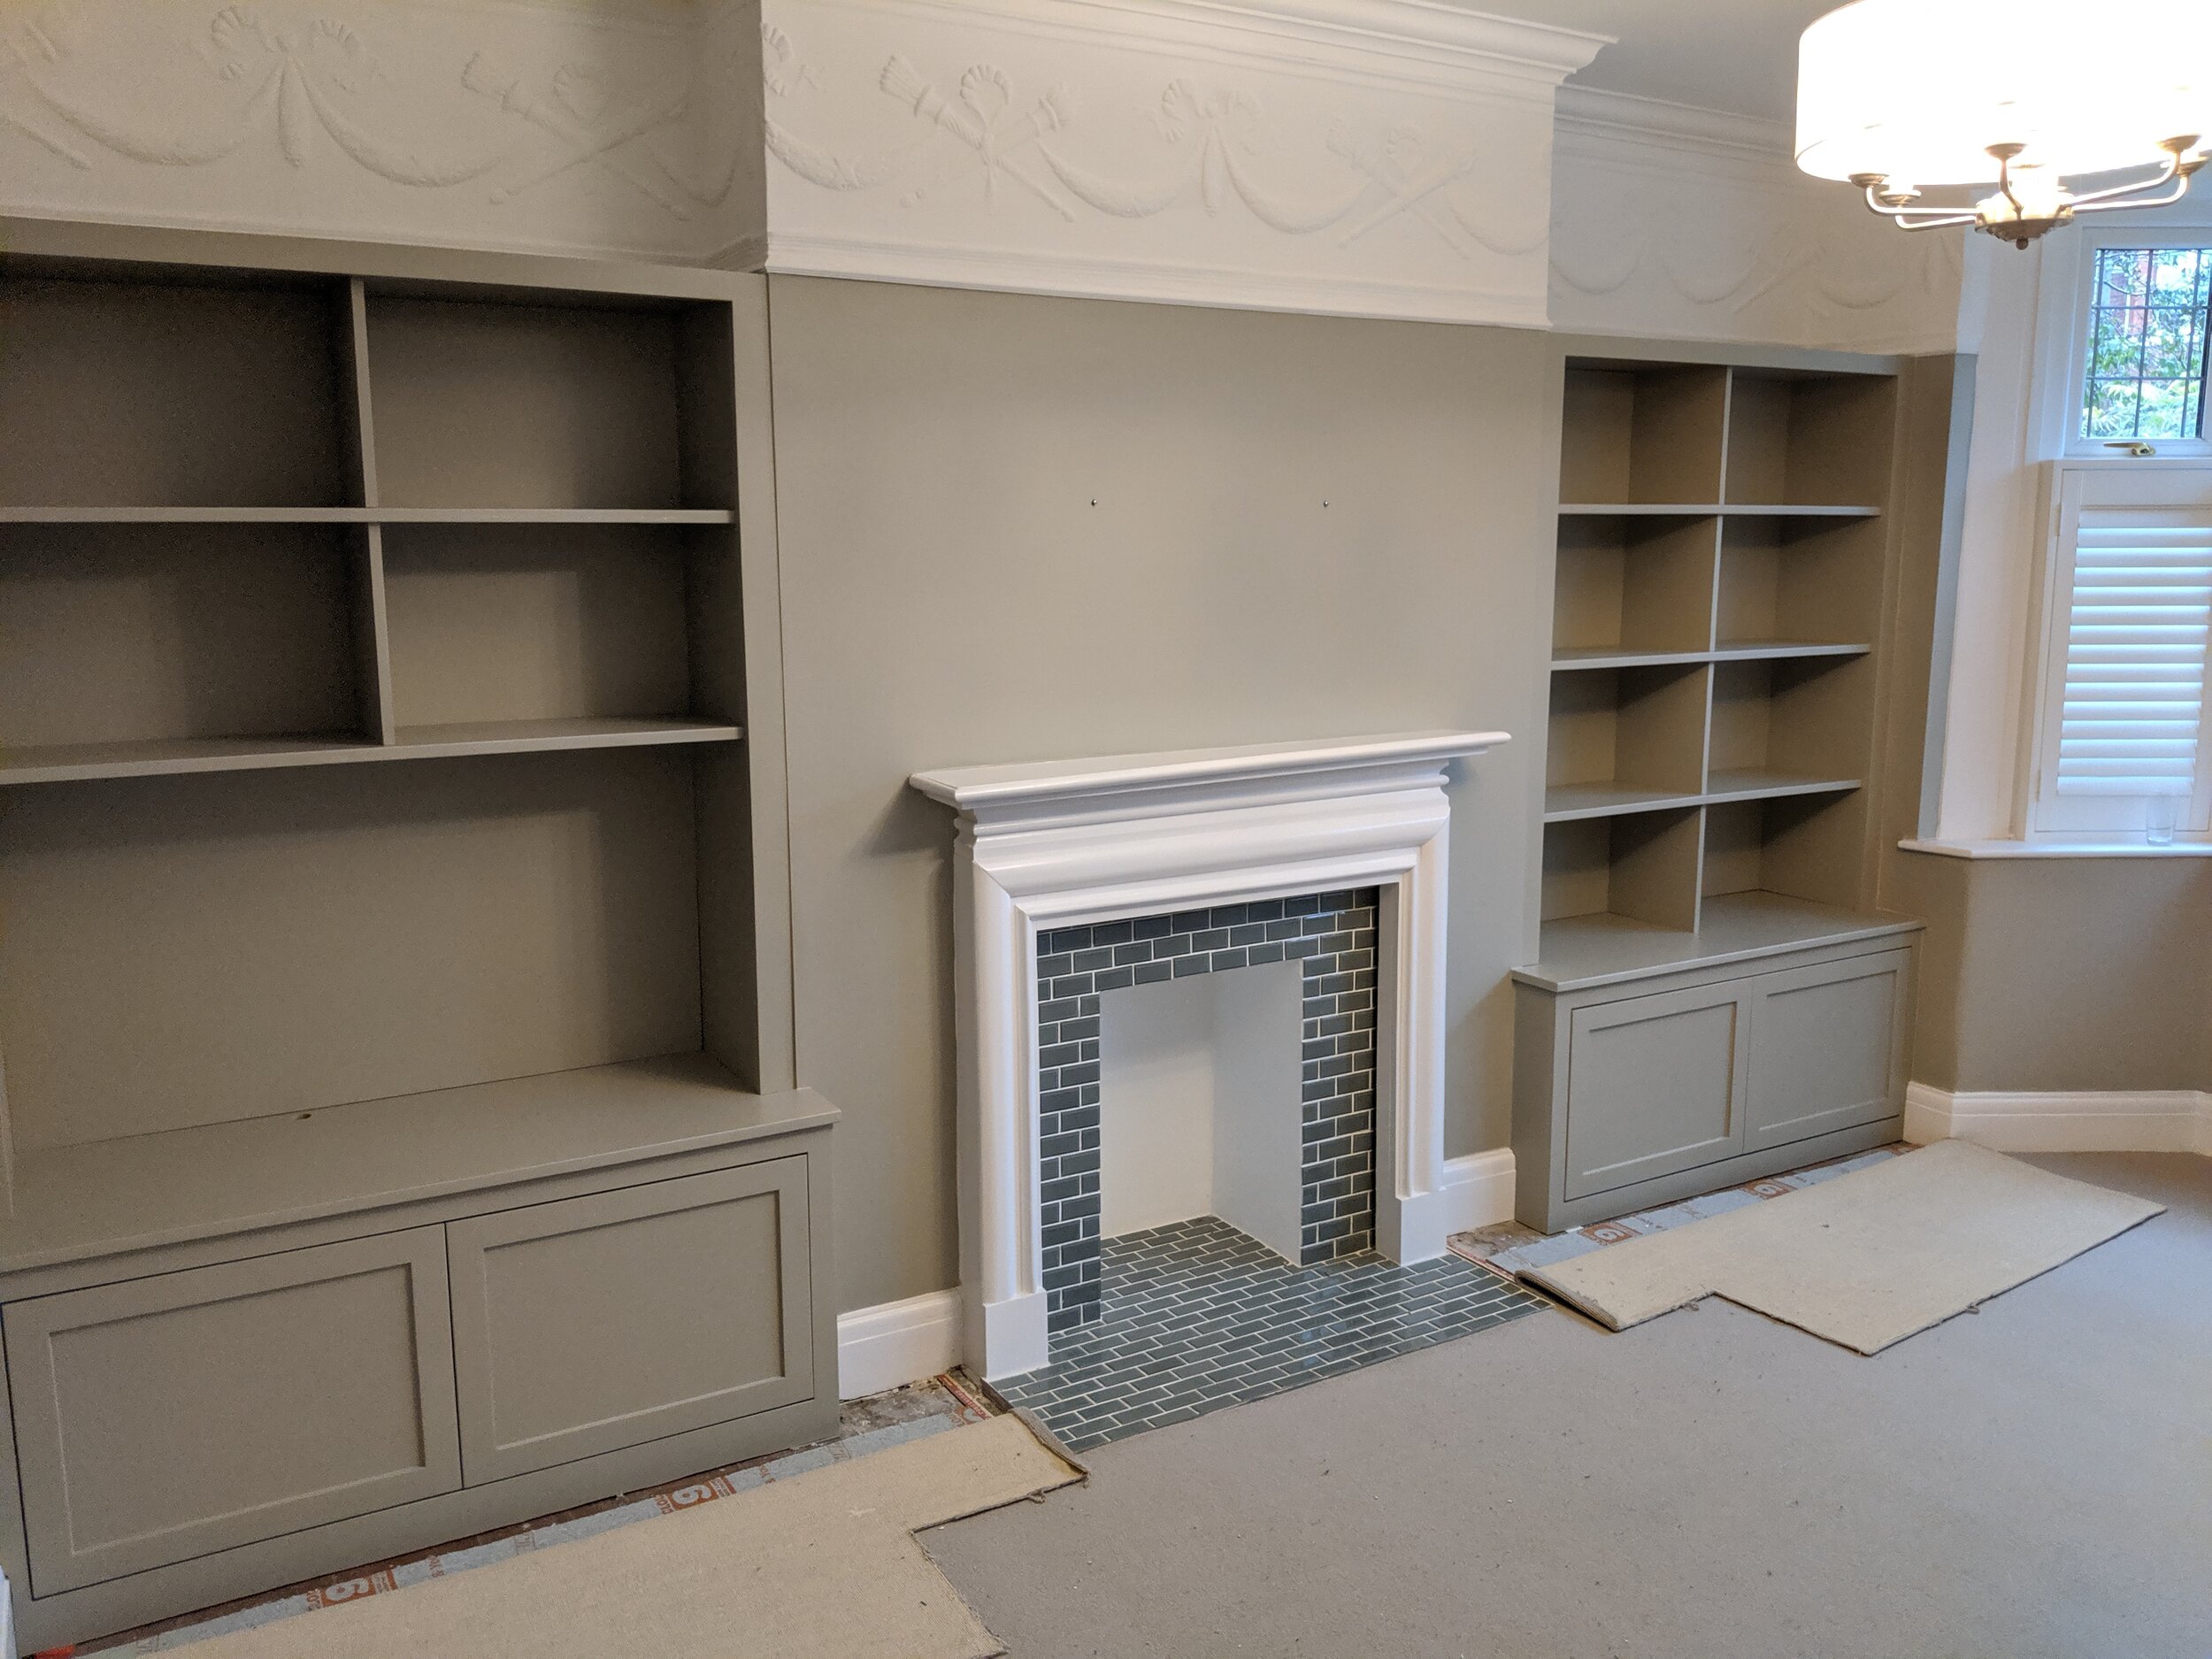 Alcove shelves and cupboards